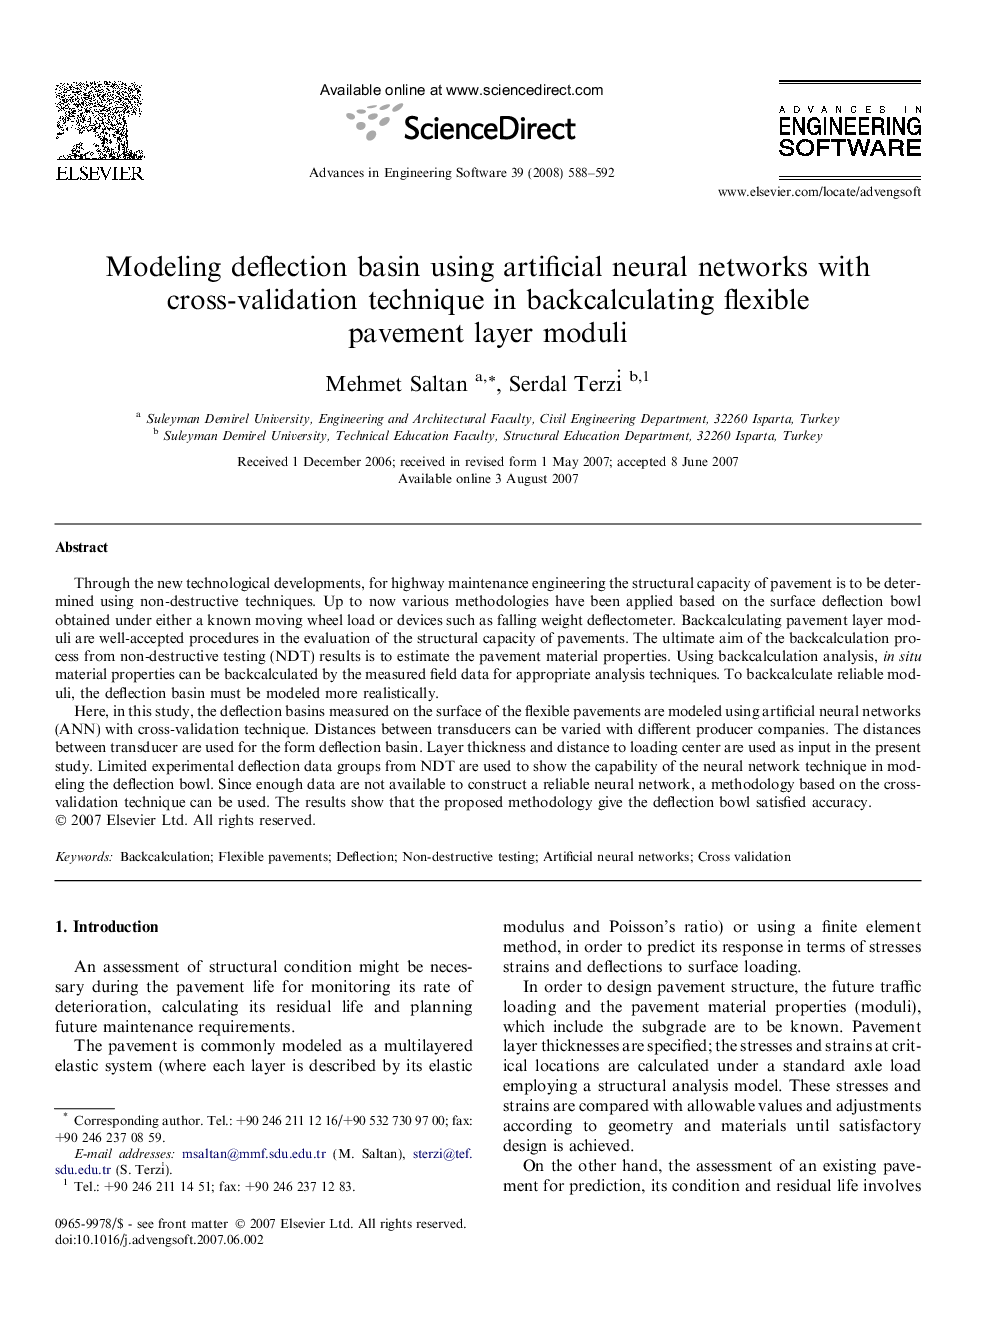 Modeling deflection basin using artificial neural networks with cross-validation technique in backcalculating flexible pavement layer moduli